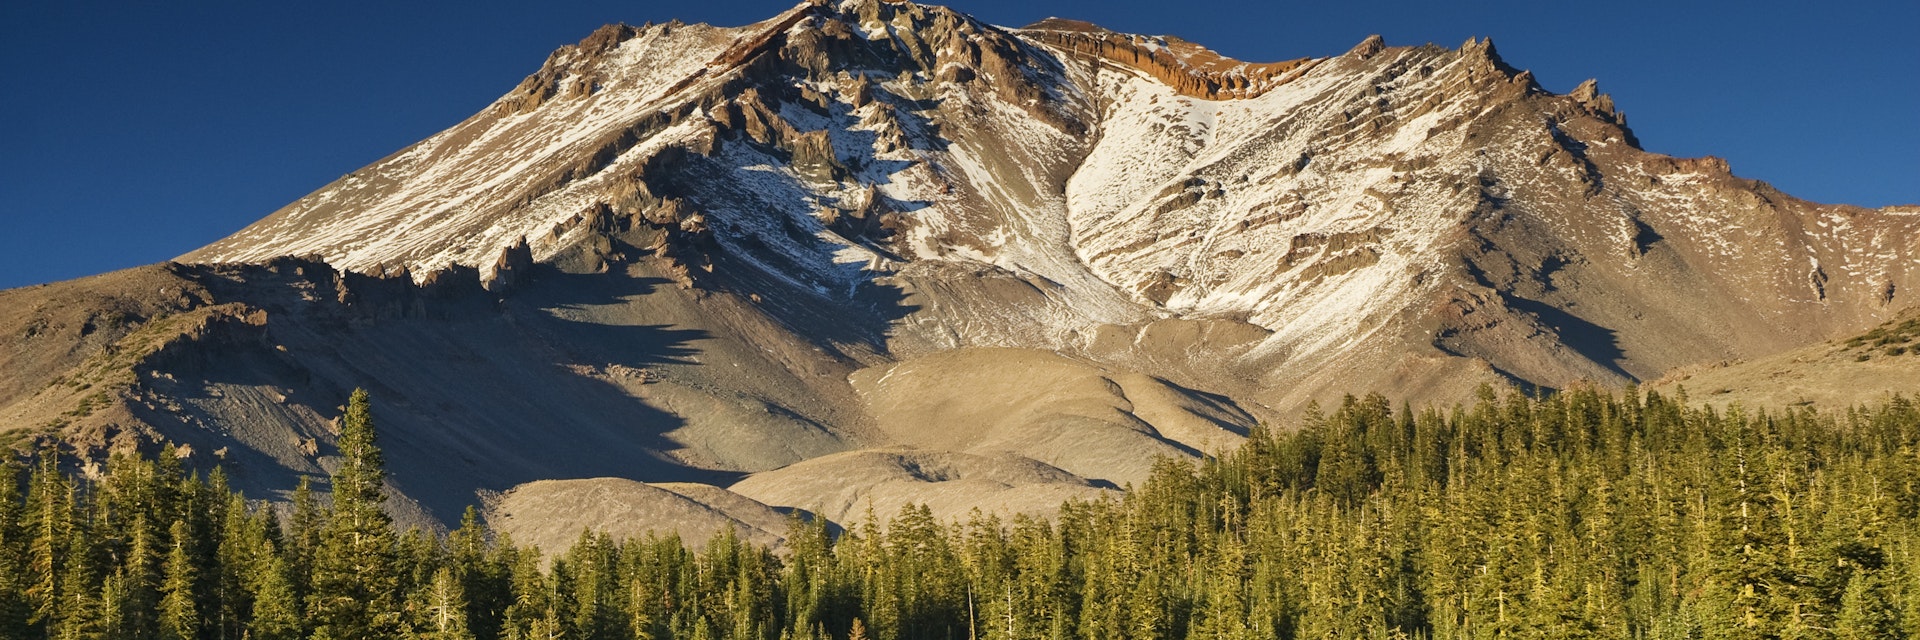 Avalanche Gulch area on Mt Shasta at sunset, seen from Bunny Flat Trailhead on Everitt Memorial Highway.